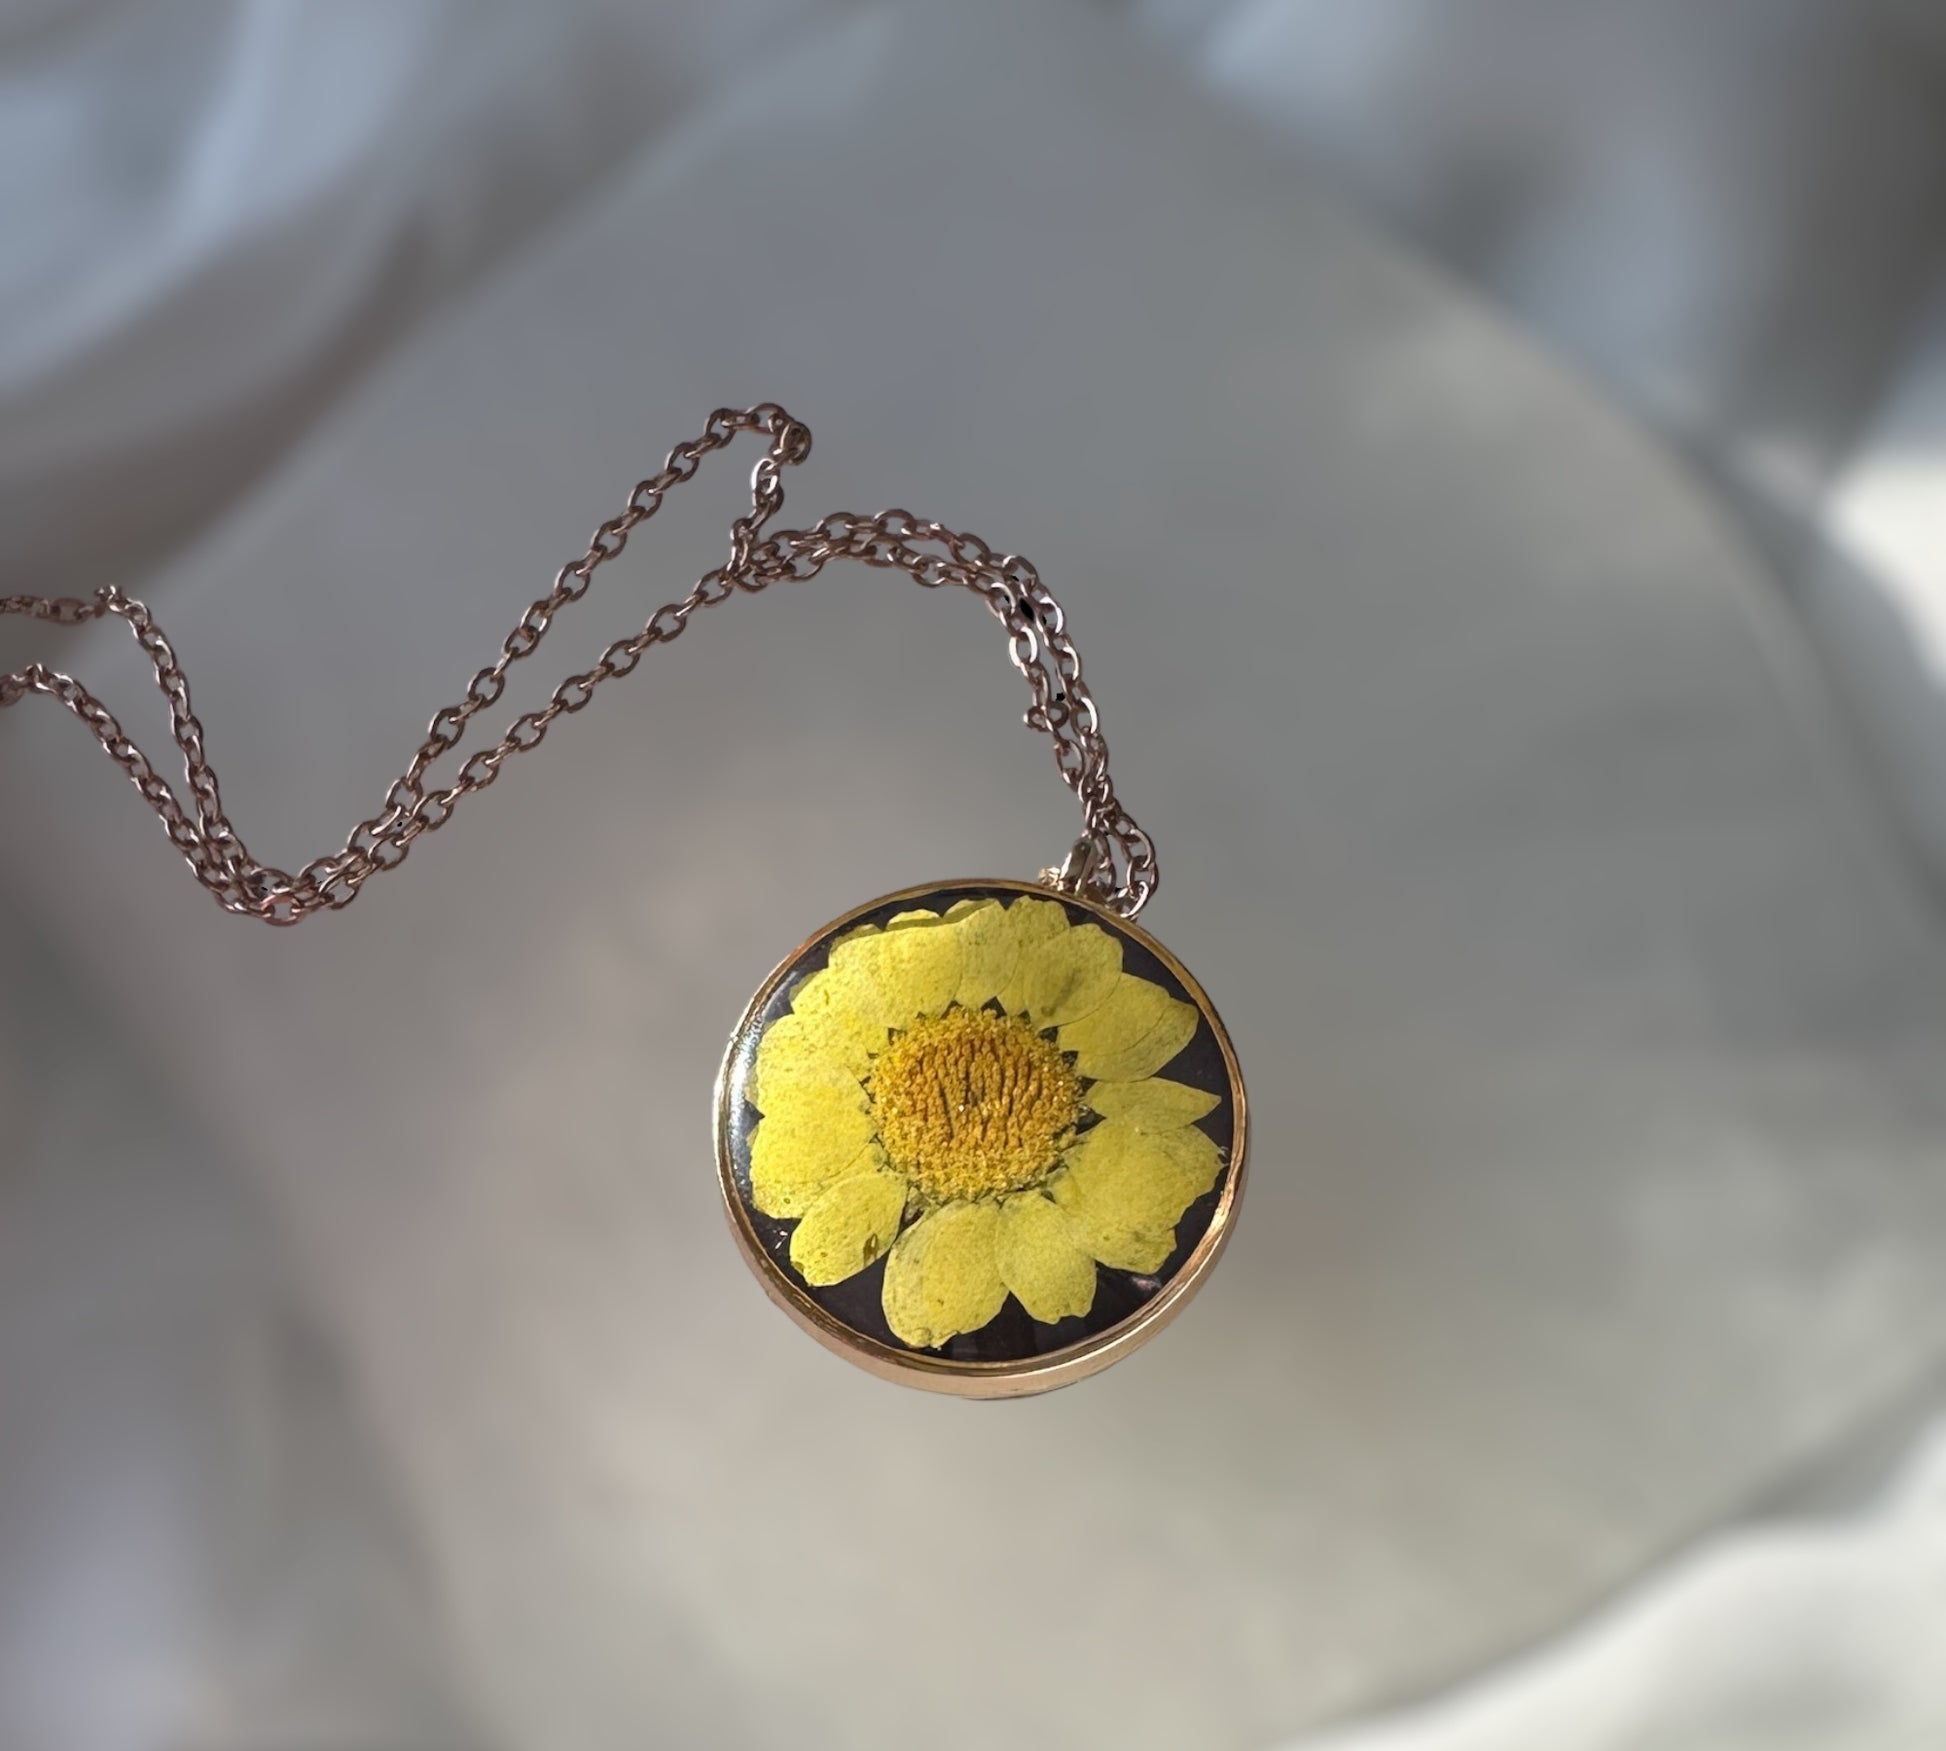 Daisy Pendant - Double Sided Nature-Inspired Daisy Flower Necklace